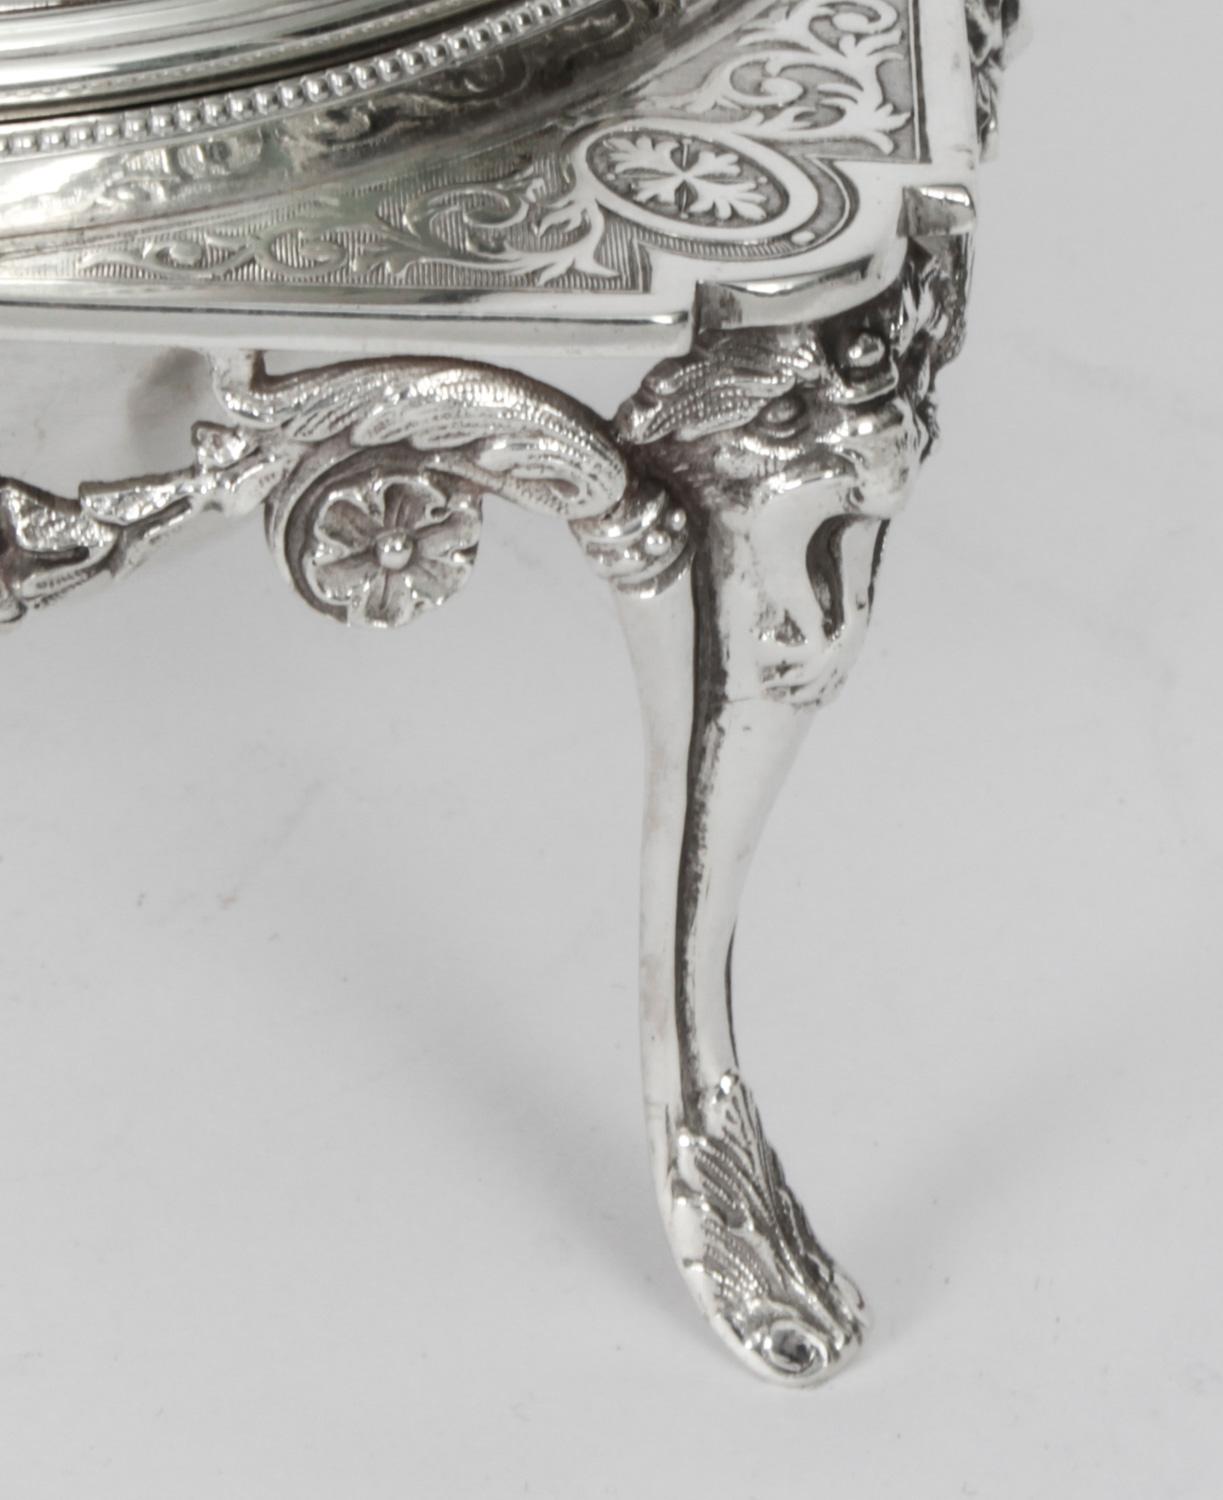 Antique English Silver Plated Roll Over Butter / Caviar Dish, 19th Century 6